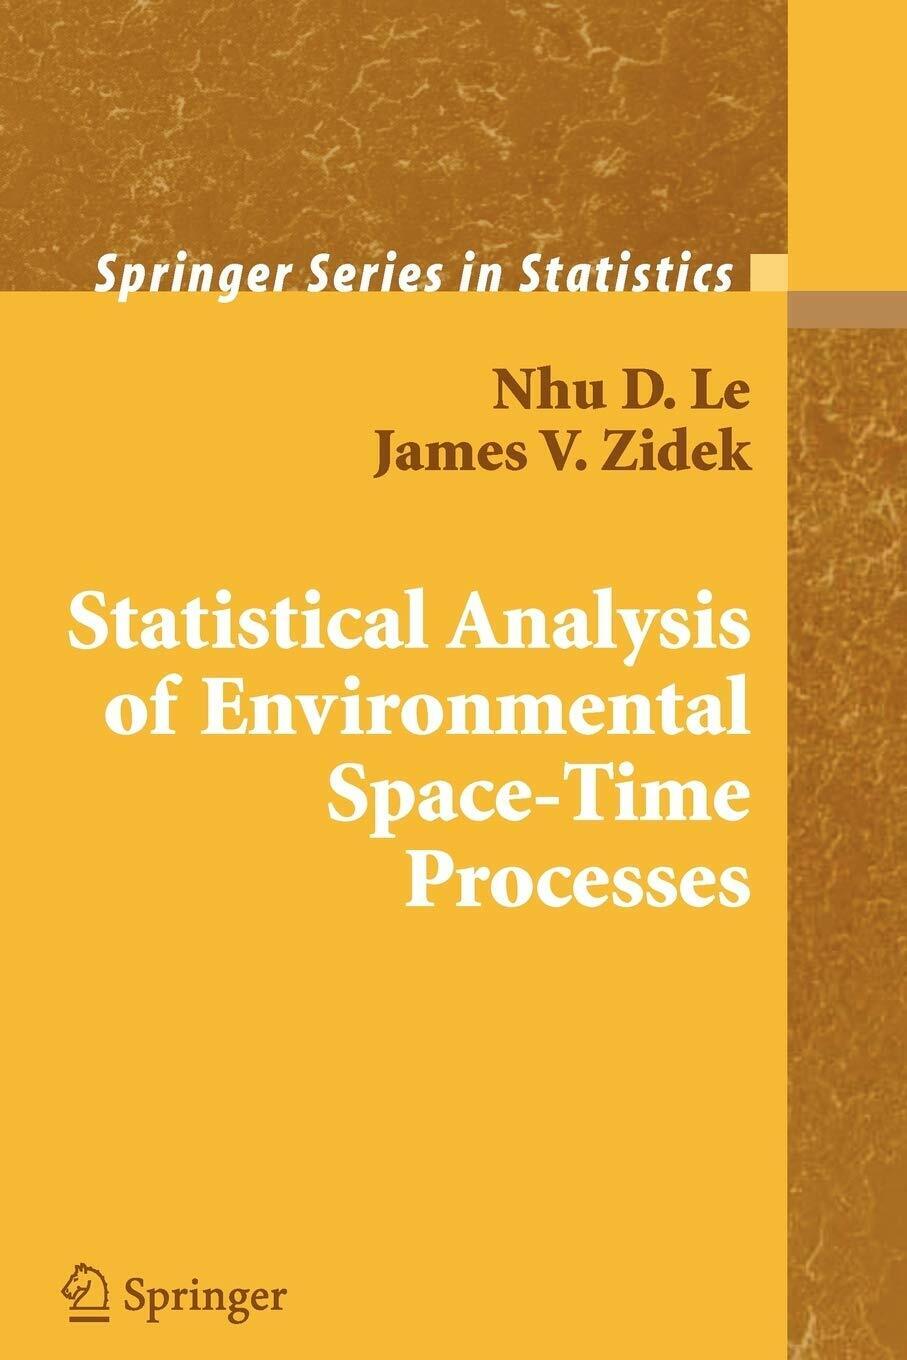 Statistical Analysis of Environmental Space-Time Processes - Nhu D. Le - 2010